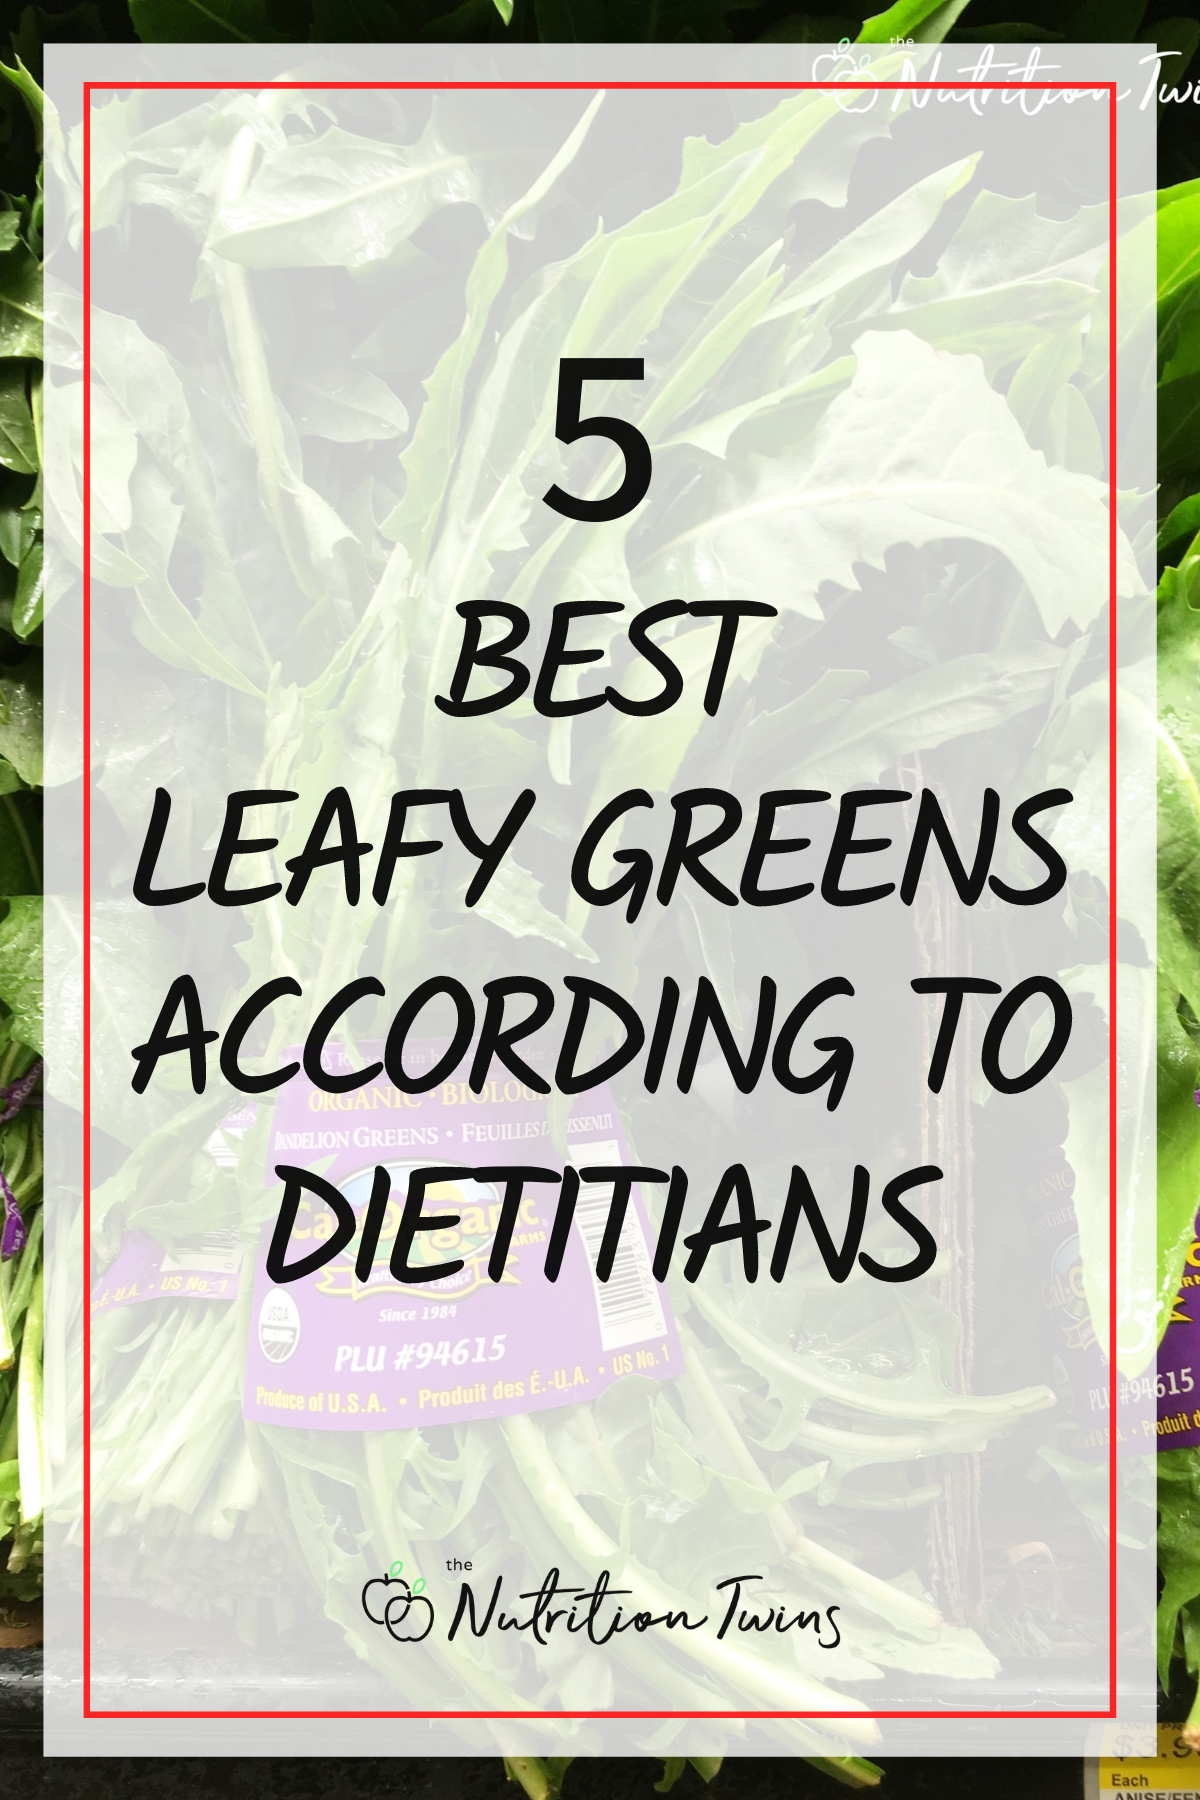 5 Best Leafy Greens According to Dietitians text with dandelion greens in background